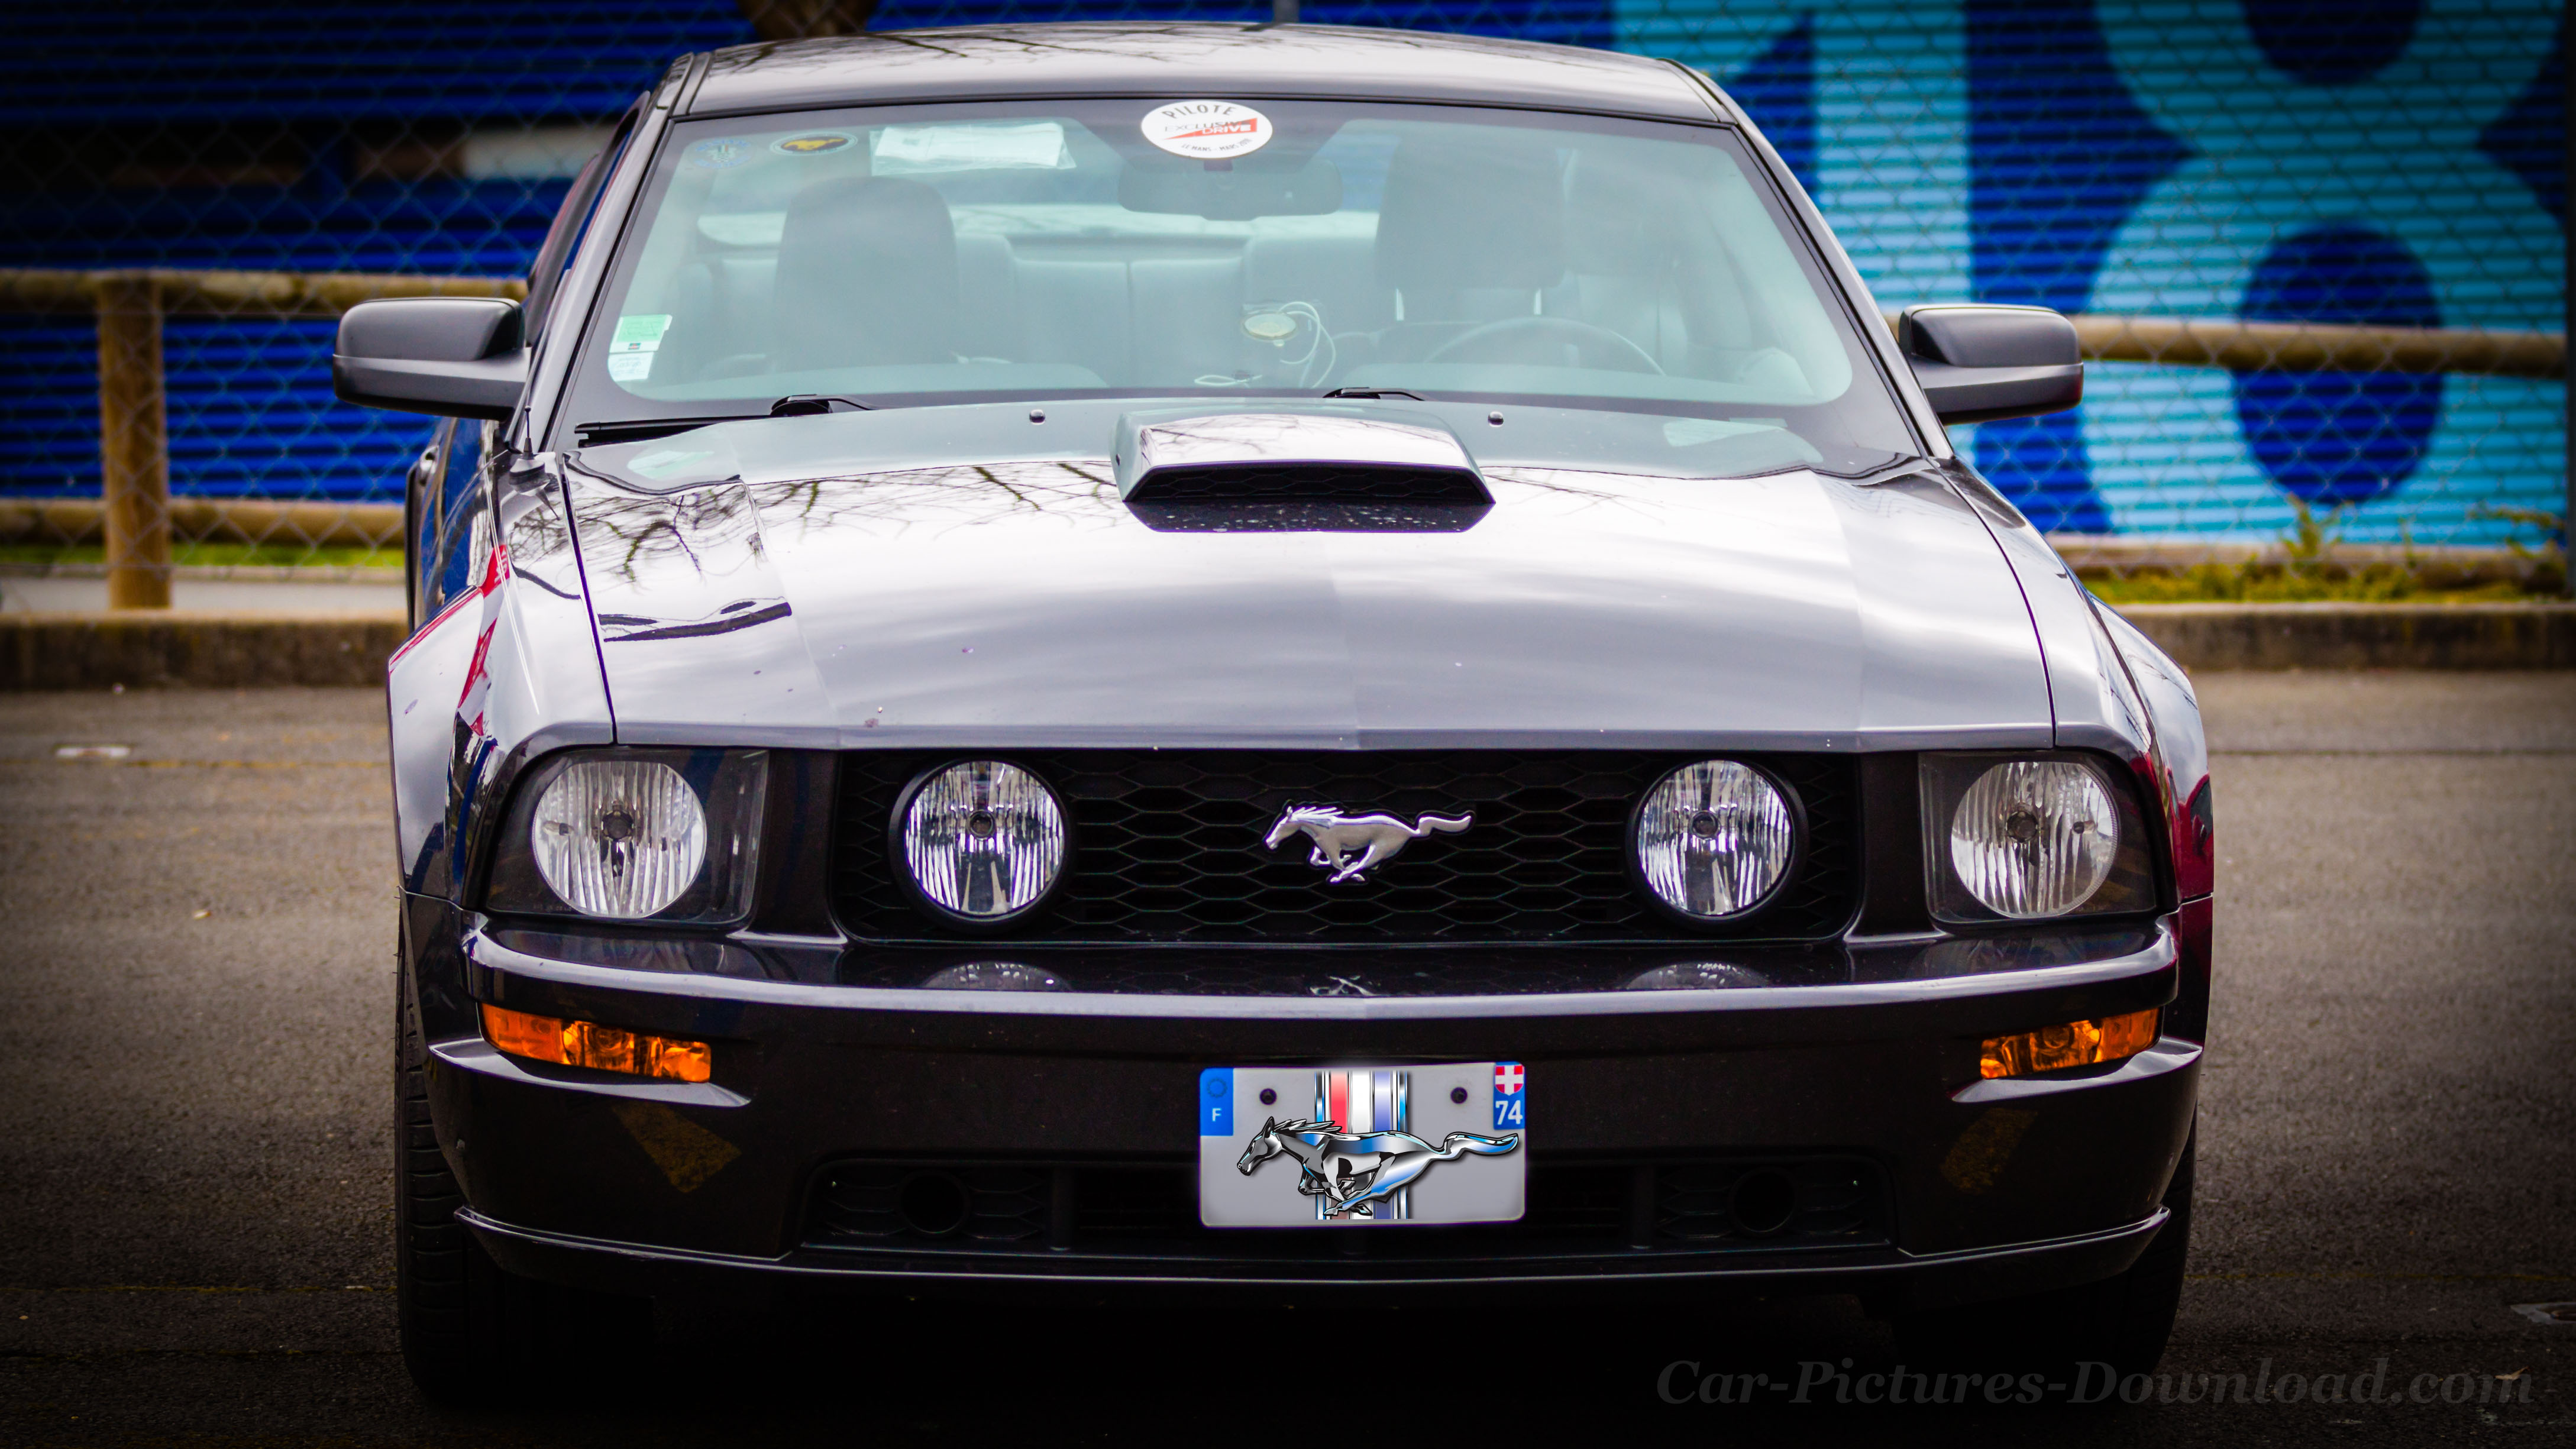 First Generation Ford Mustang - HD Wallpaper 